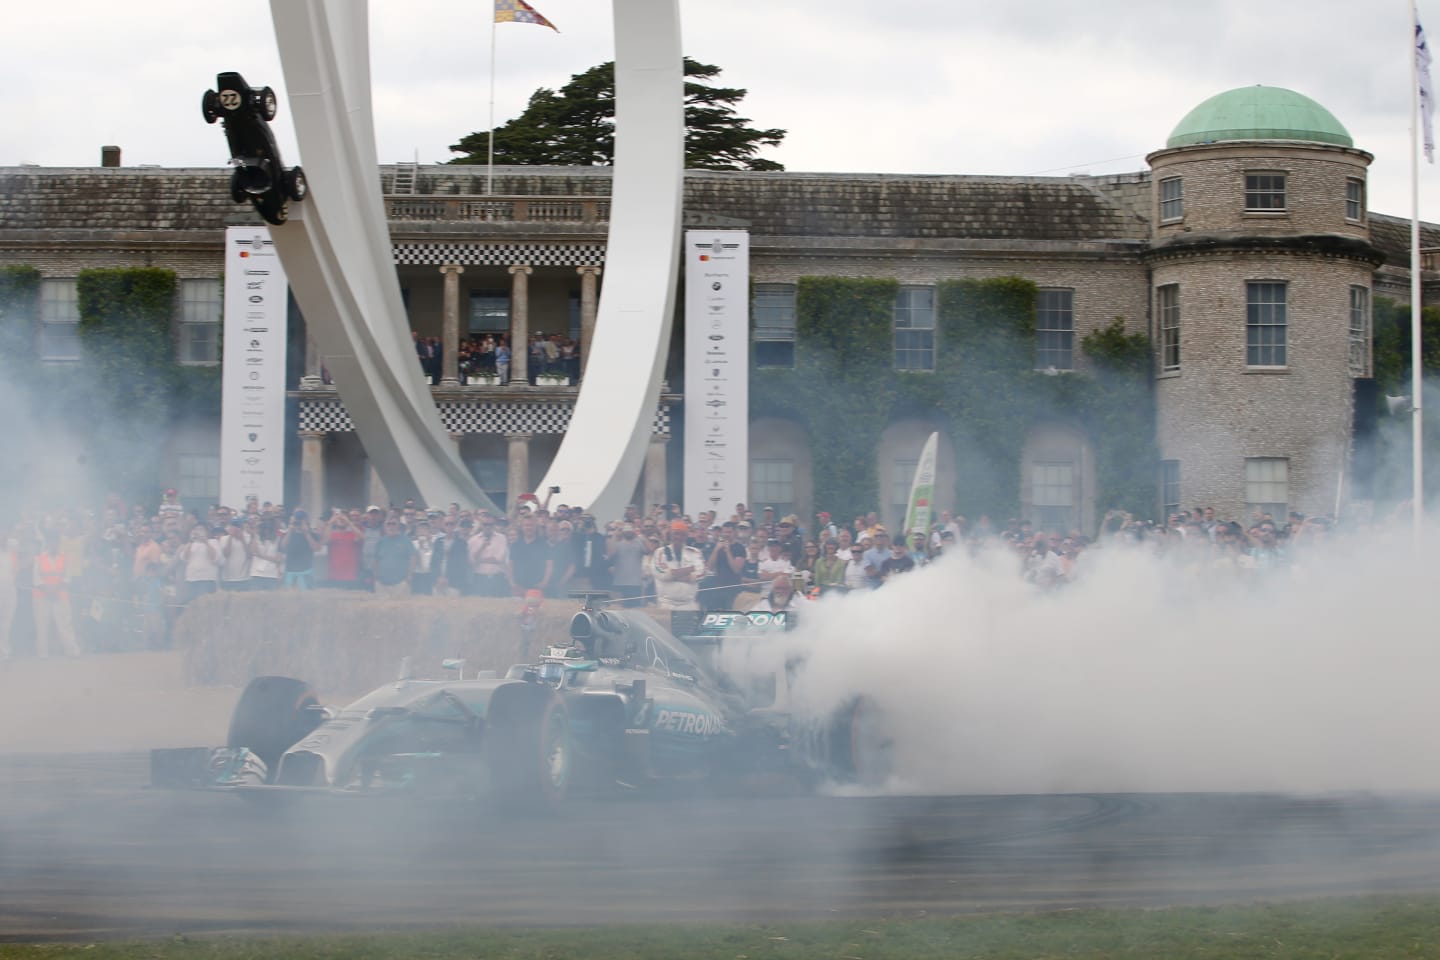 www.sutton-images.com Valtteri Bottas (FIN) Mercedes AMG F1 W05 burn out at Goodwood Festival of Speed, Goodwood, England, 30 June - 2 July 2017. © Sutton Images